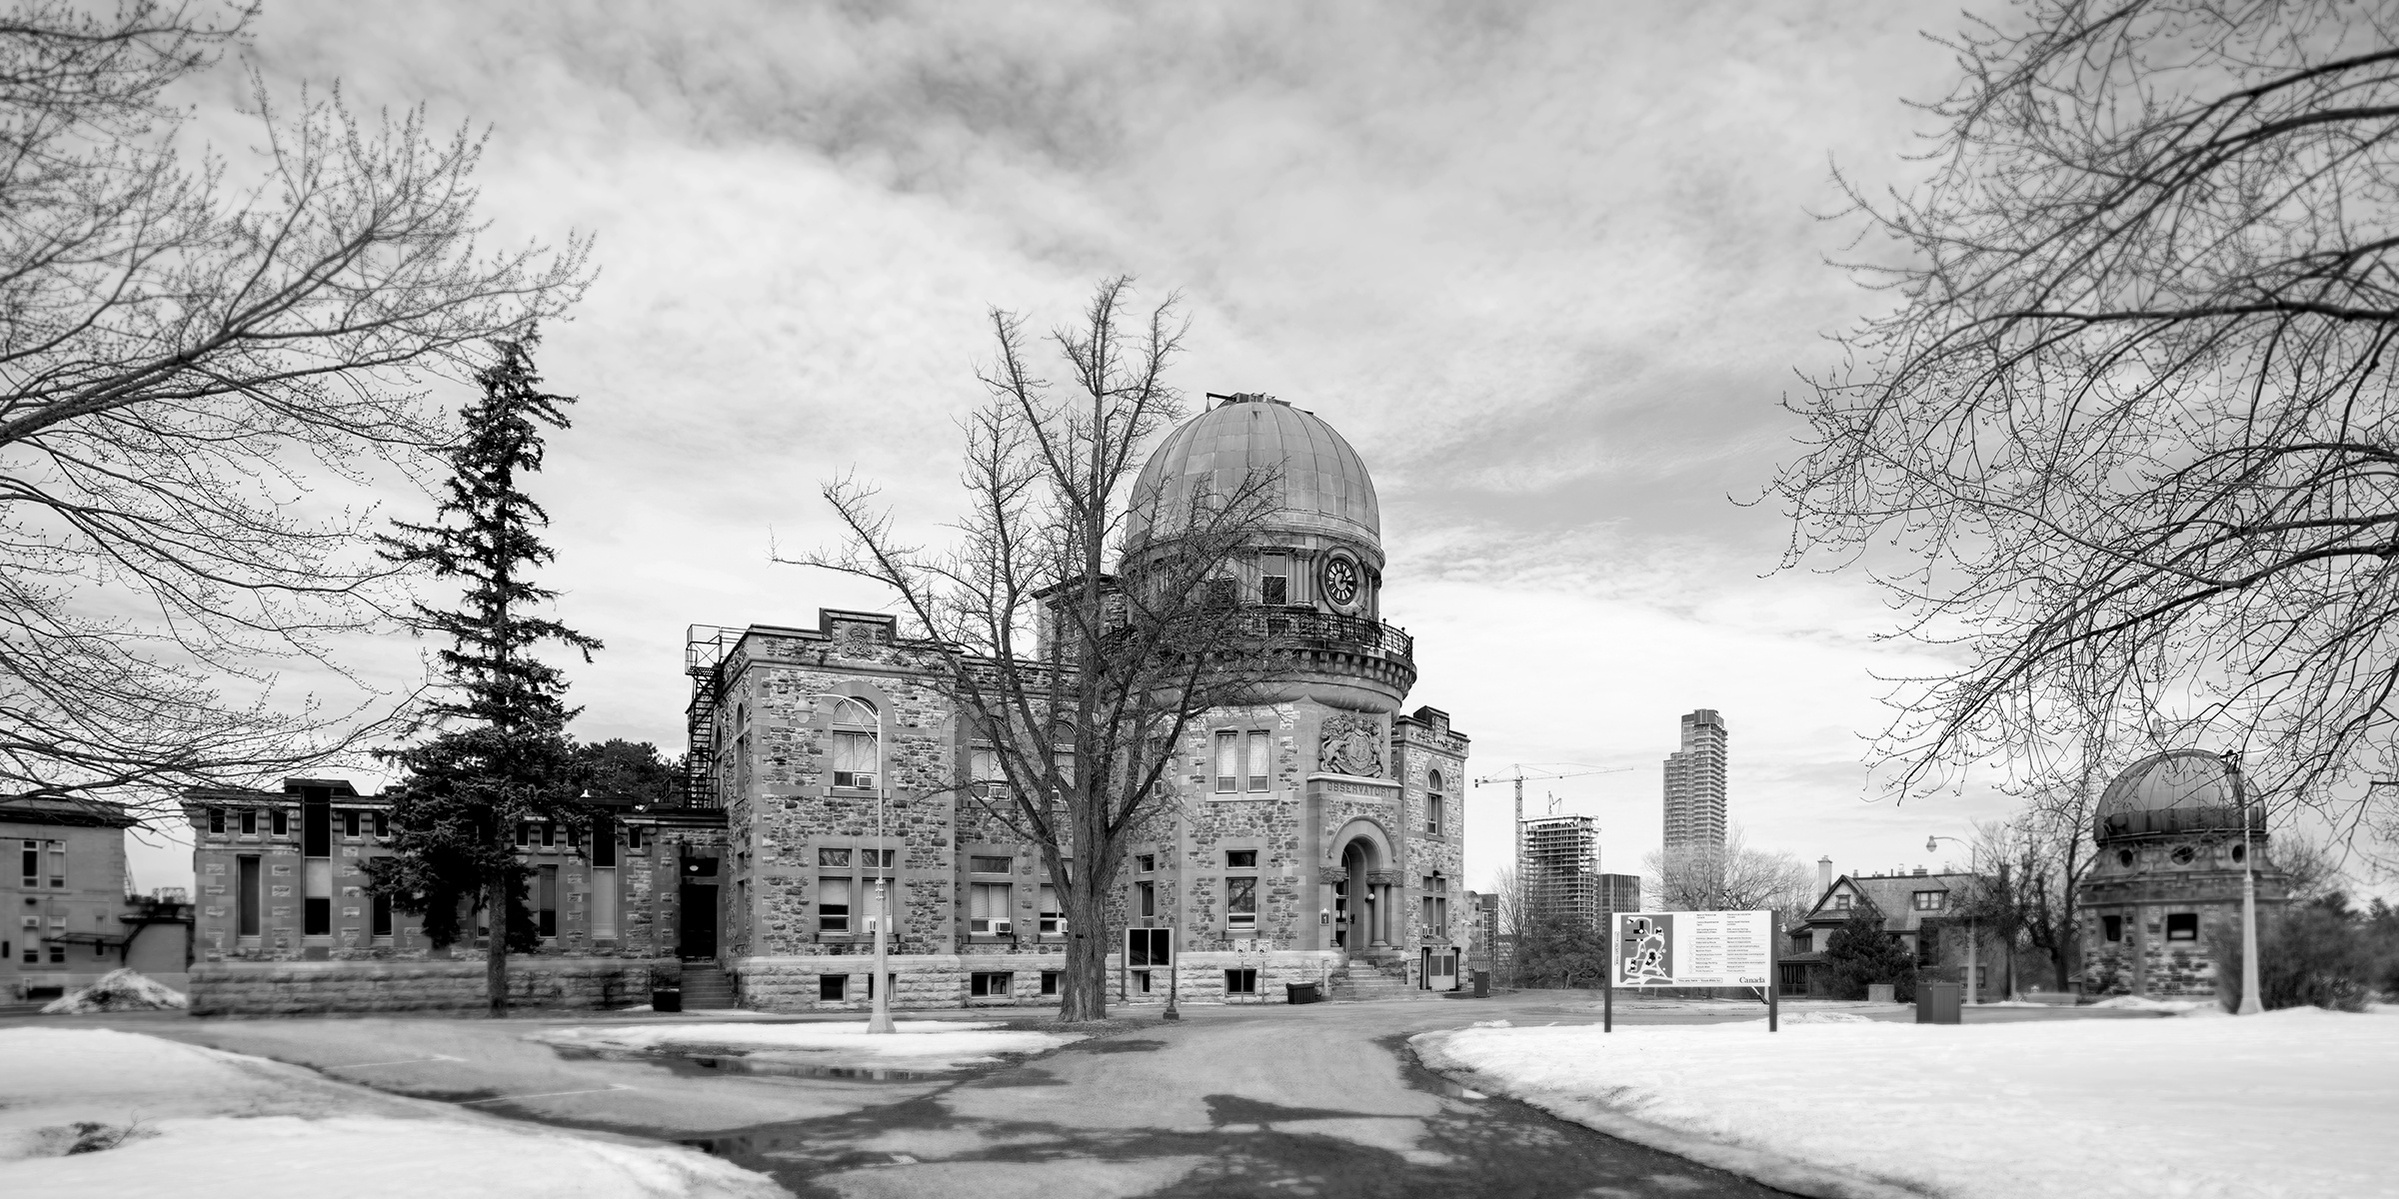 Dominion Observatory Ottawa in black and white